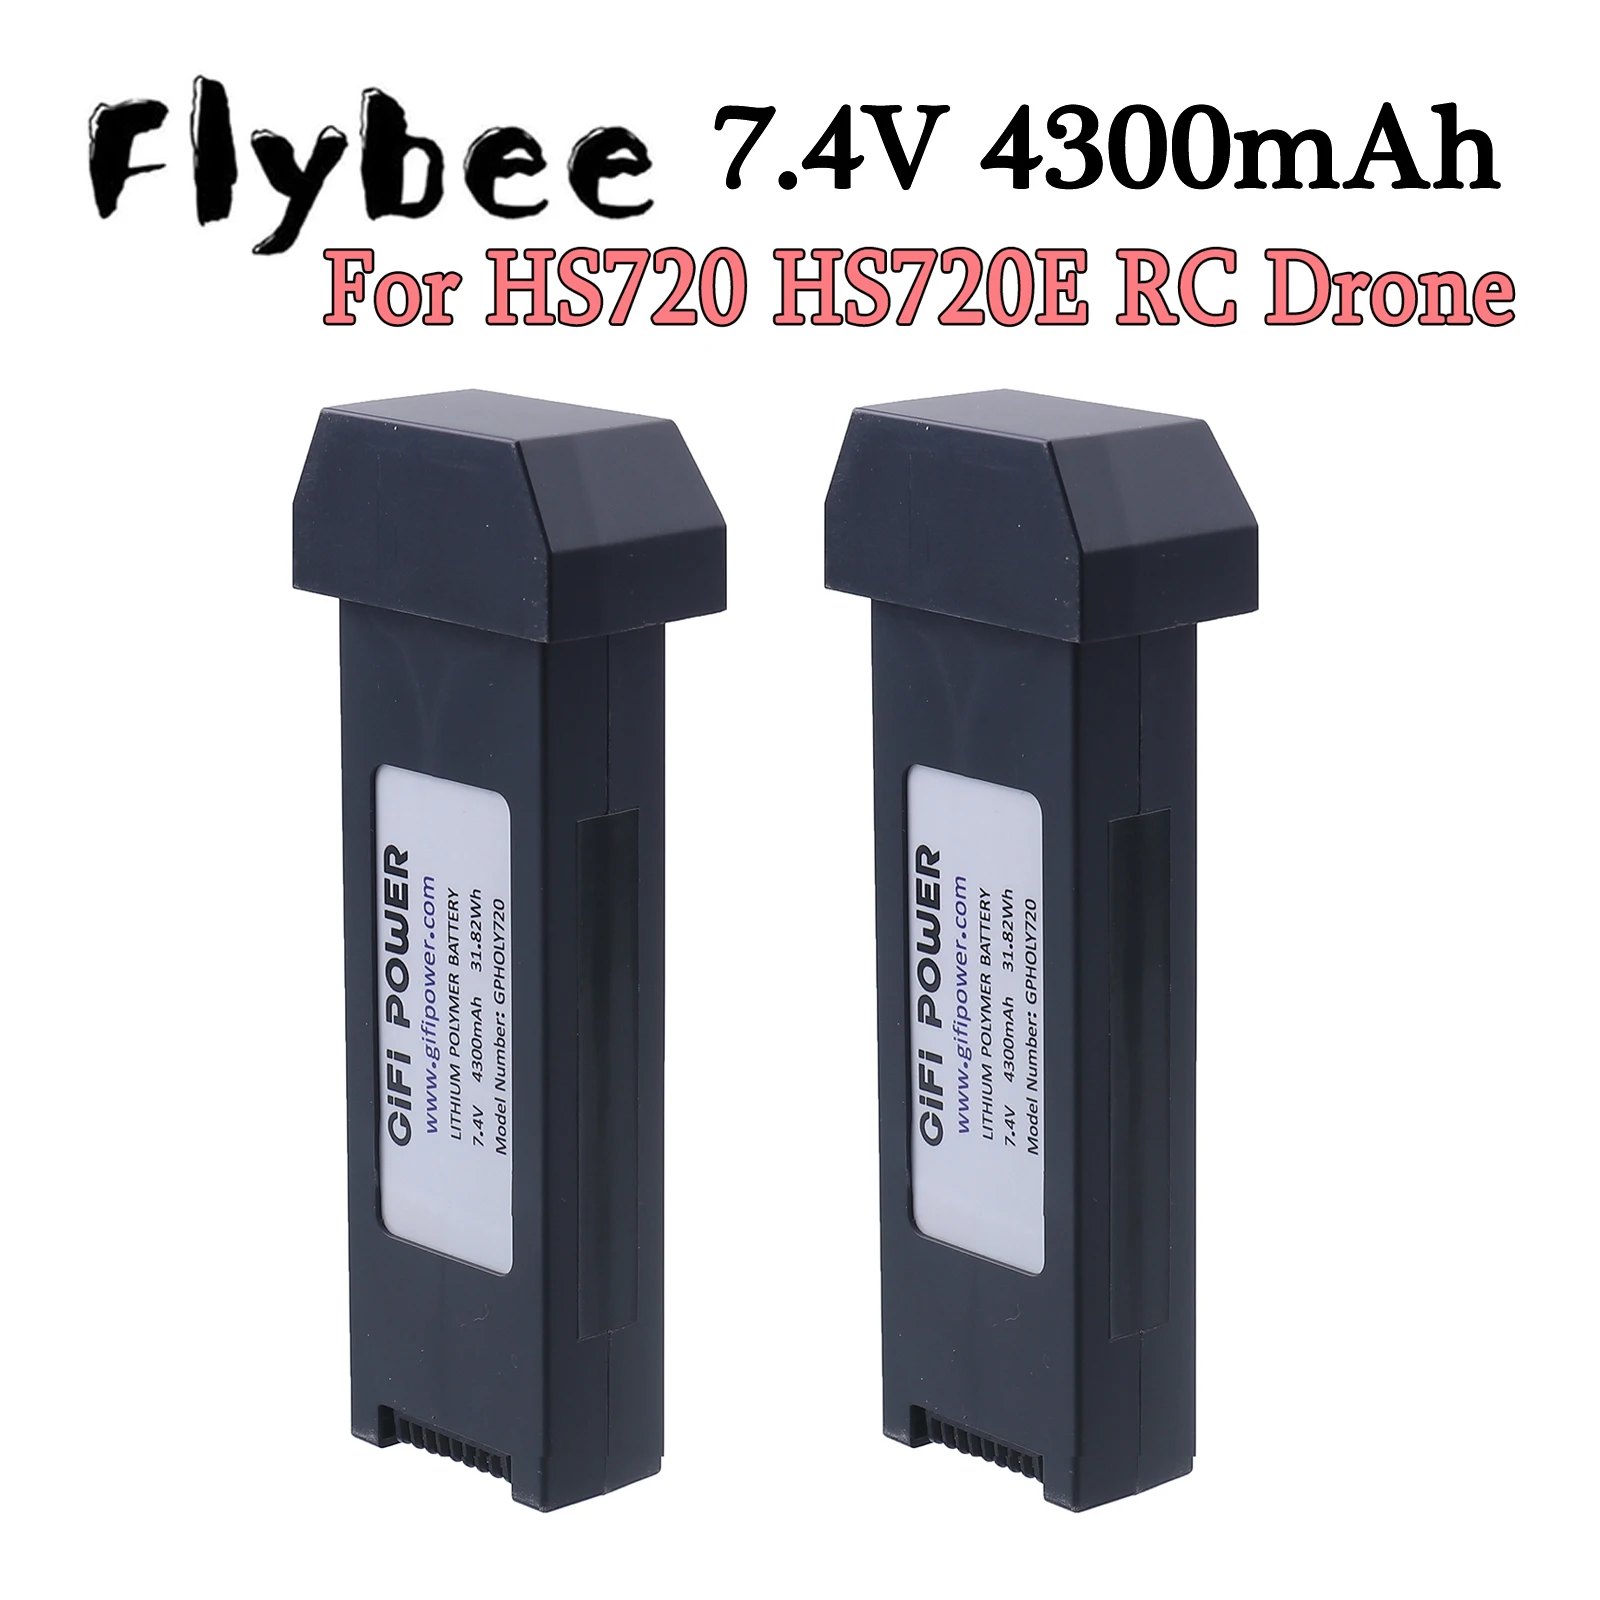 

7.4V Upgrade battery for HS720 HS720E Remote Control Drone Quadcopter Battery spare parts Accessories 7.4V 4300mah for HS720